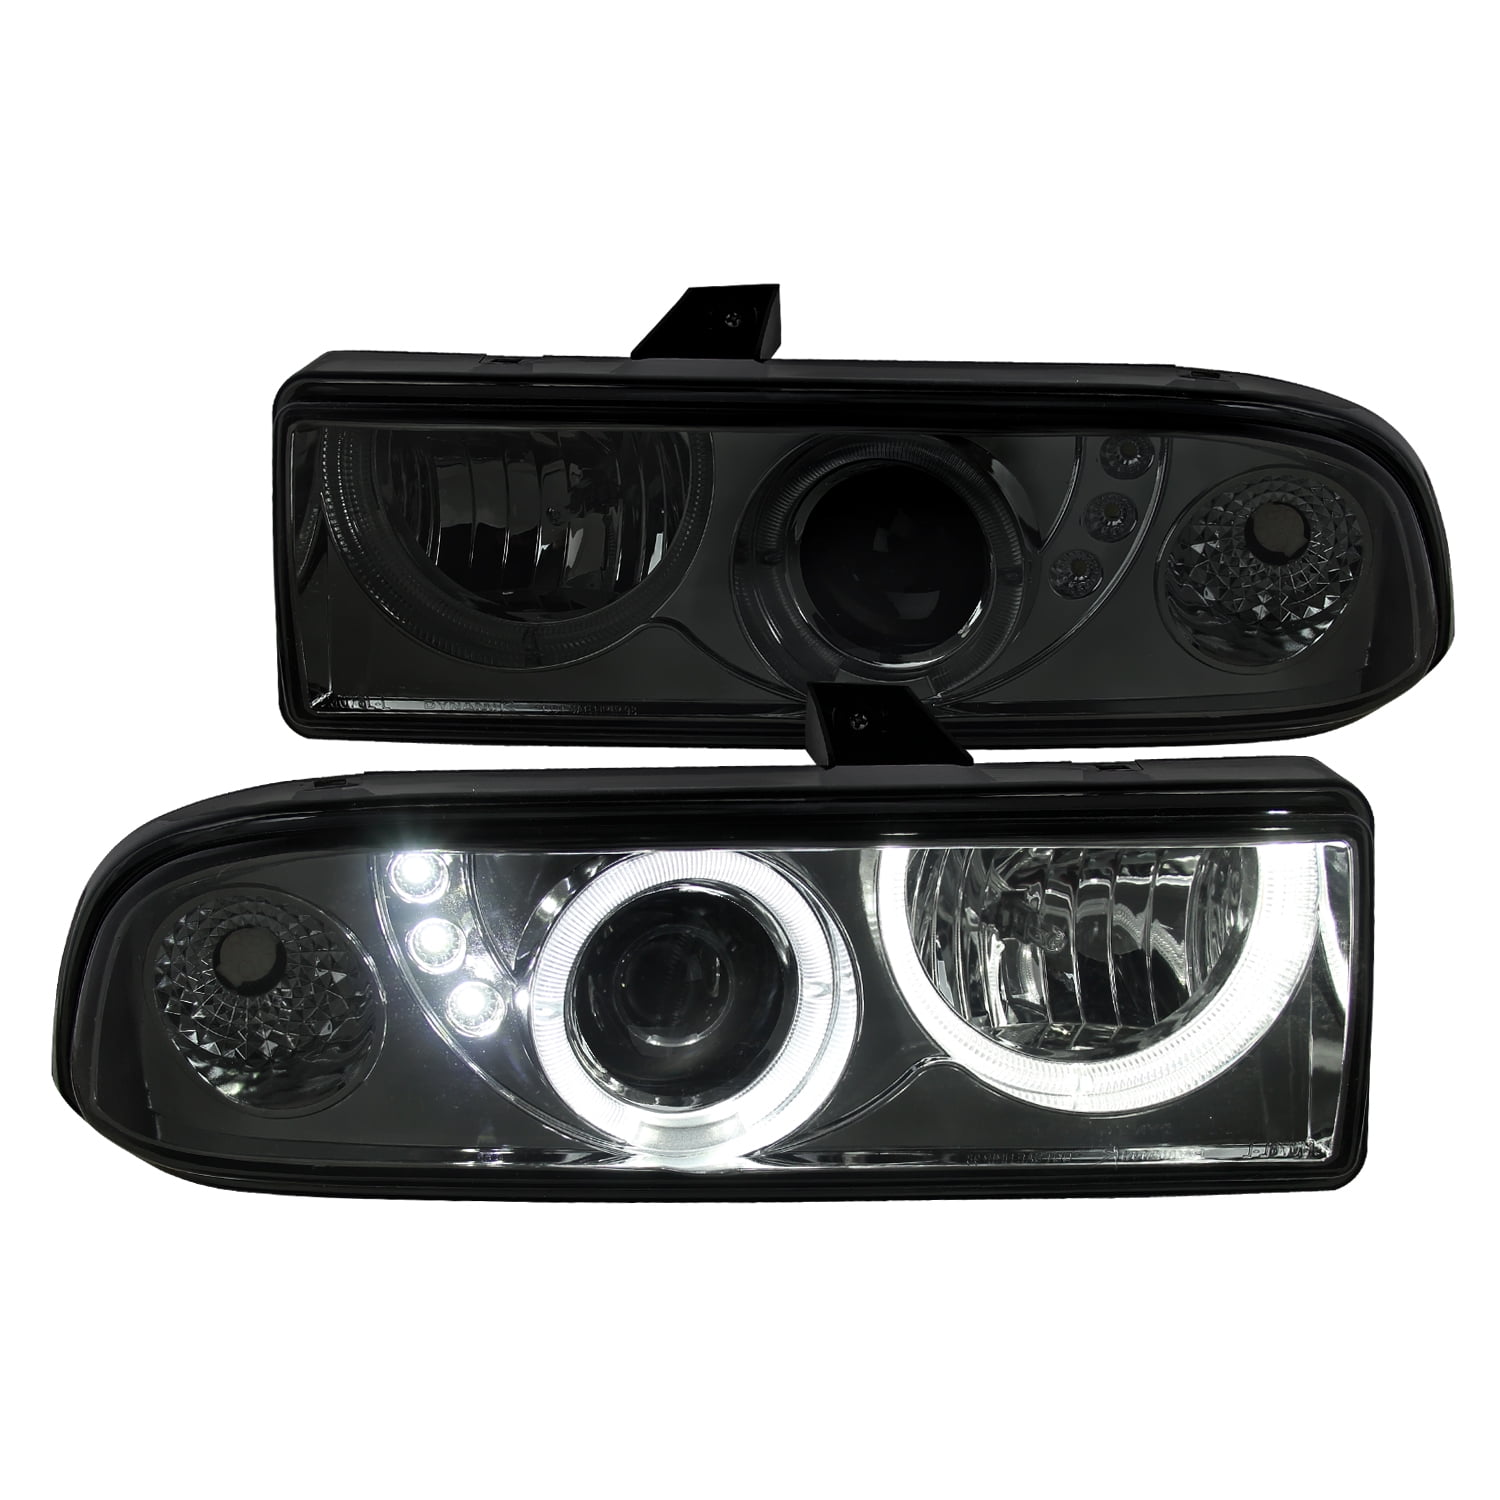 FOR 1998-2005 CHEVY BLAZER/S10 PAIR LED LOOK BUMPER LIGHTS CHROME CLEAR LENS